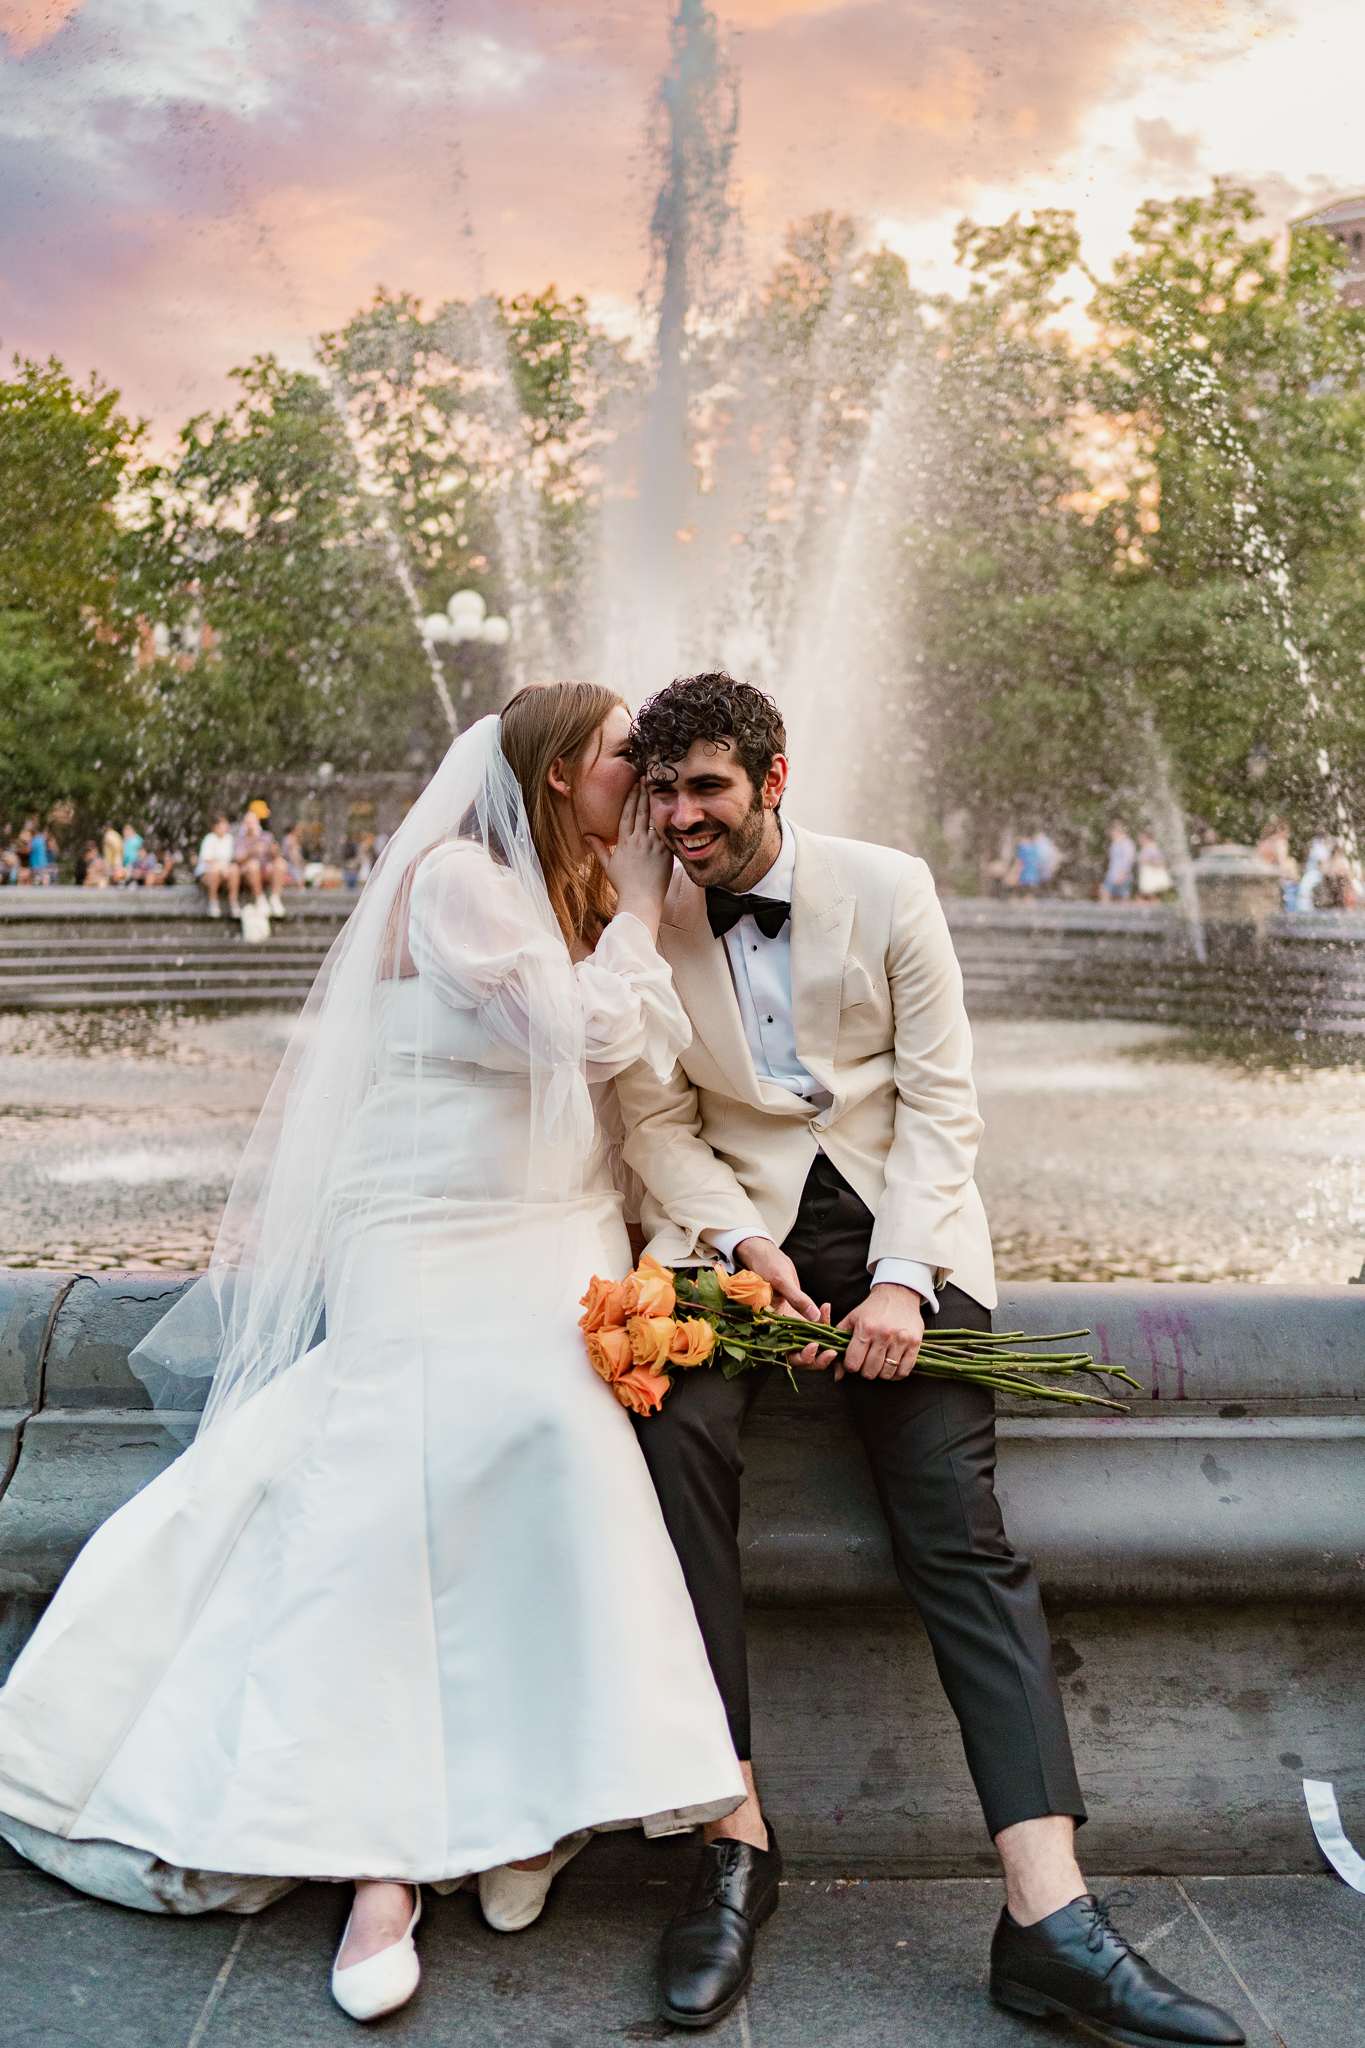 bride kissing her groom on the cheek in front of a fountain